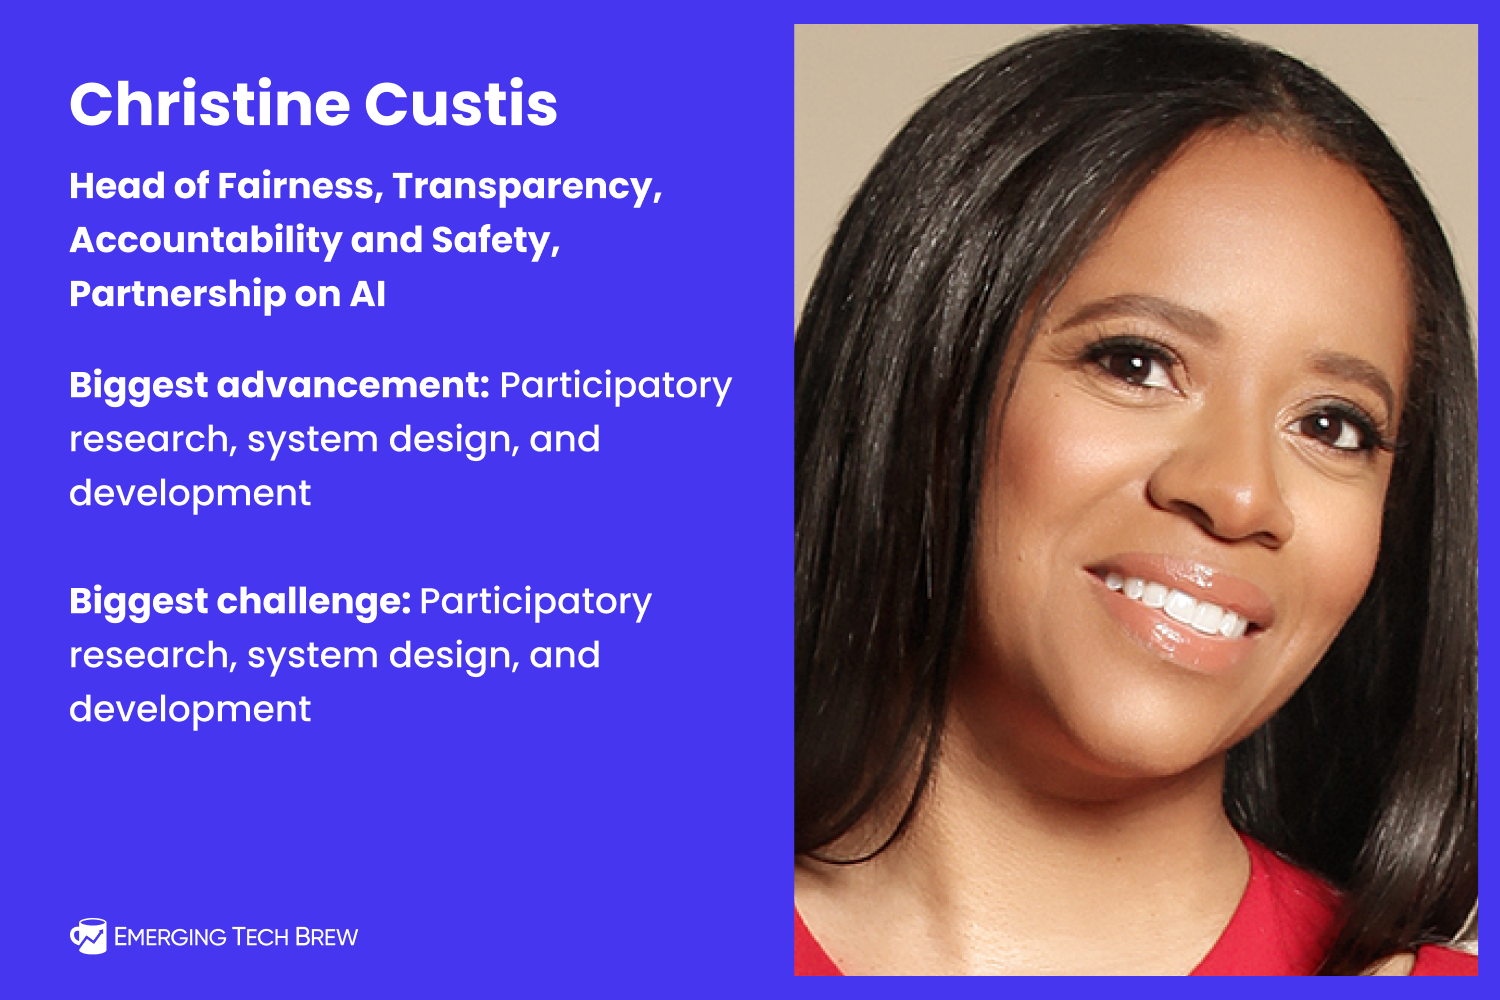 headshot of Chrstine Custis, head of fairness, transparency, accountability and safety at PAI